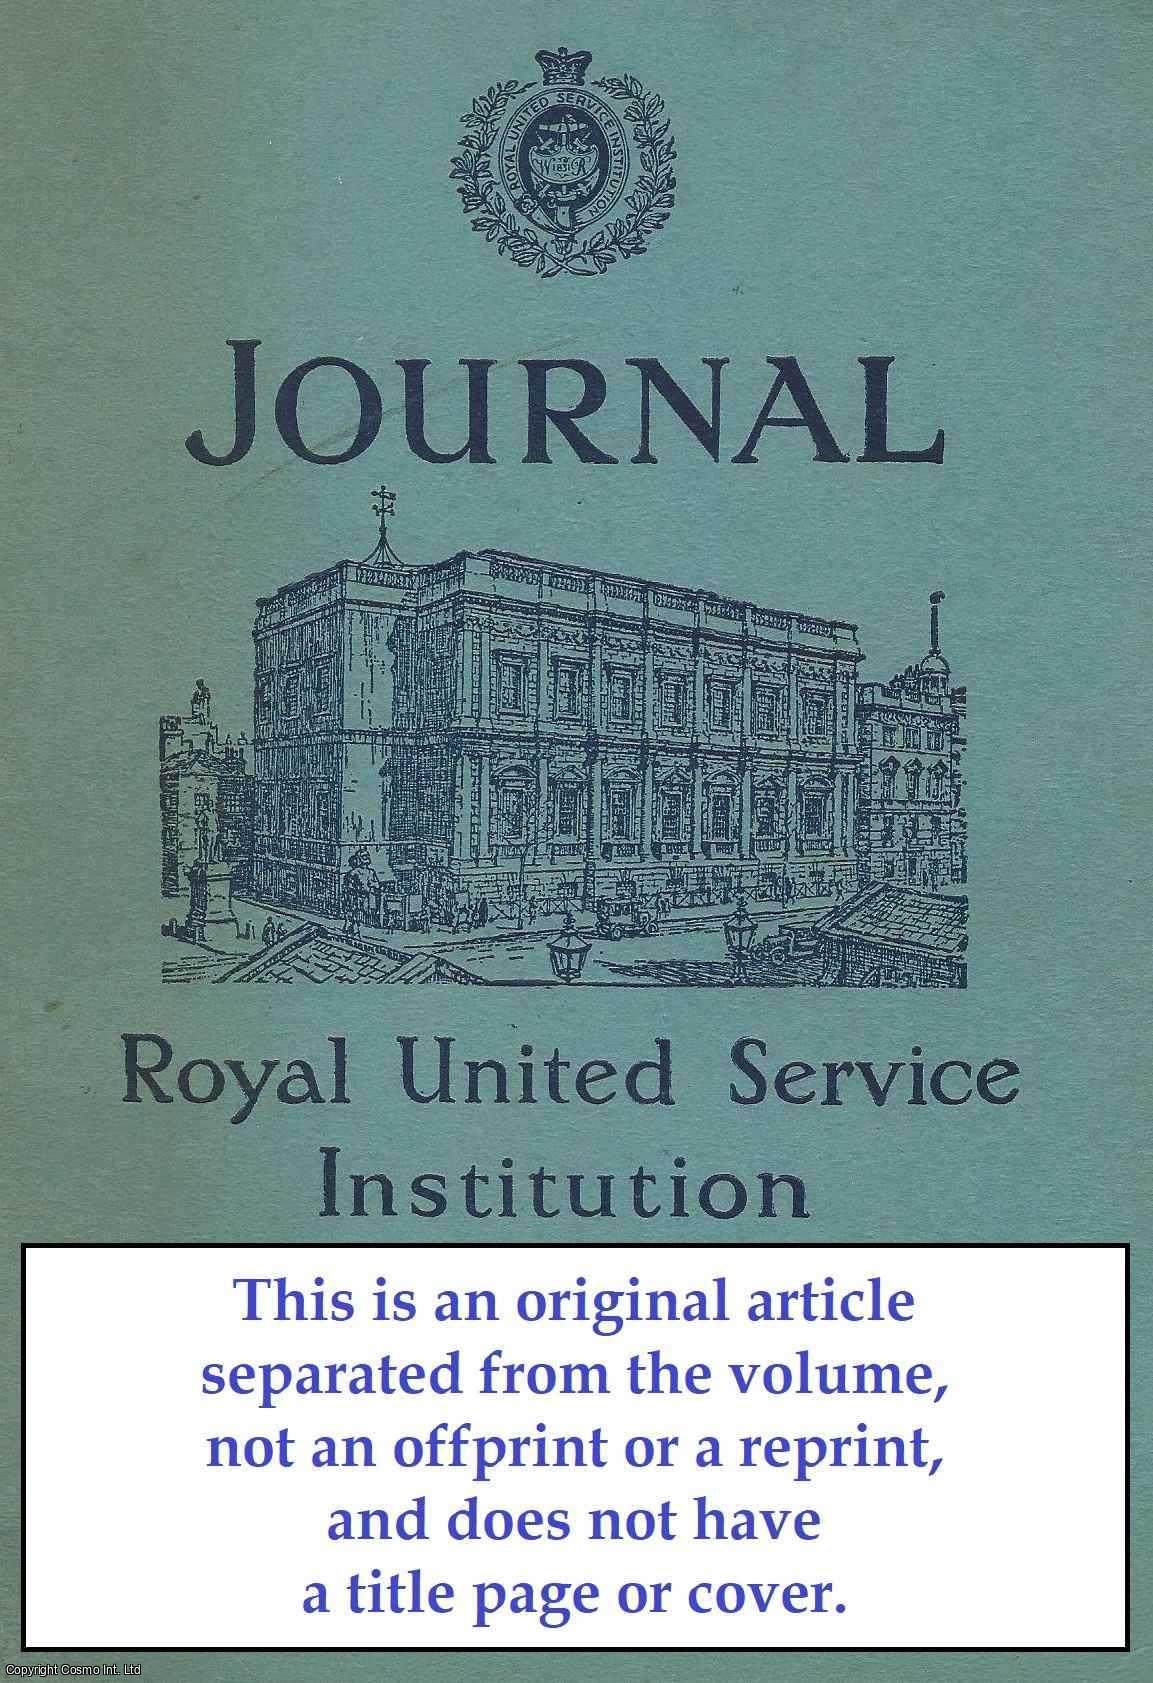 No Author Stated - The Training of Naval Officers: Lord Haig's Notes on The Report of The Committee on The Royal Naval War College, 1913. An original article from The Royal United Service Institution Journal, 1964.